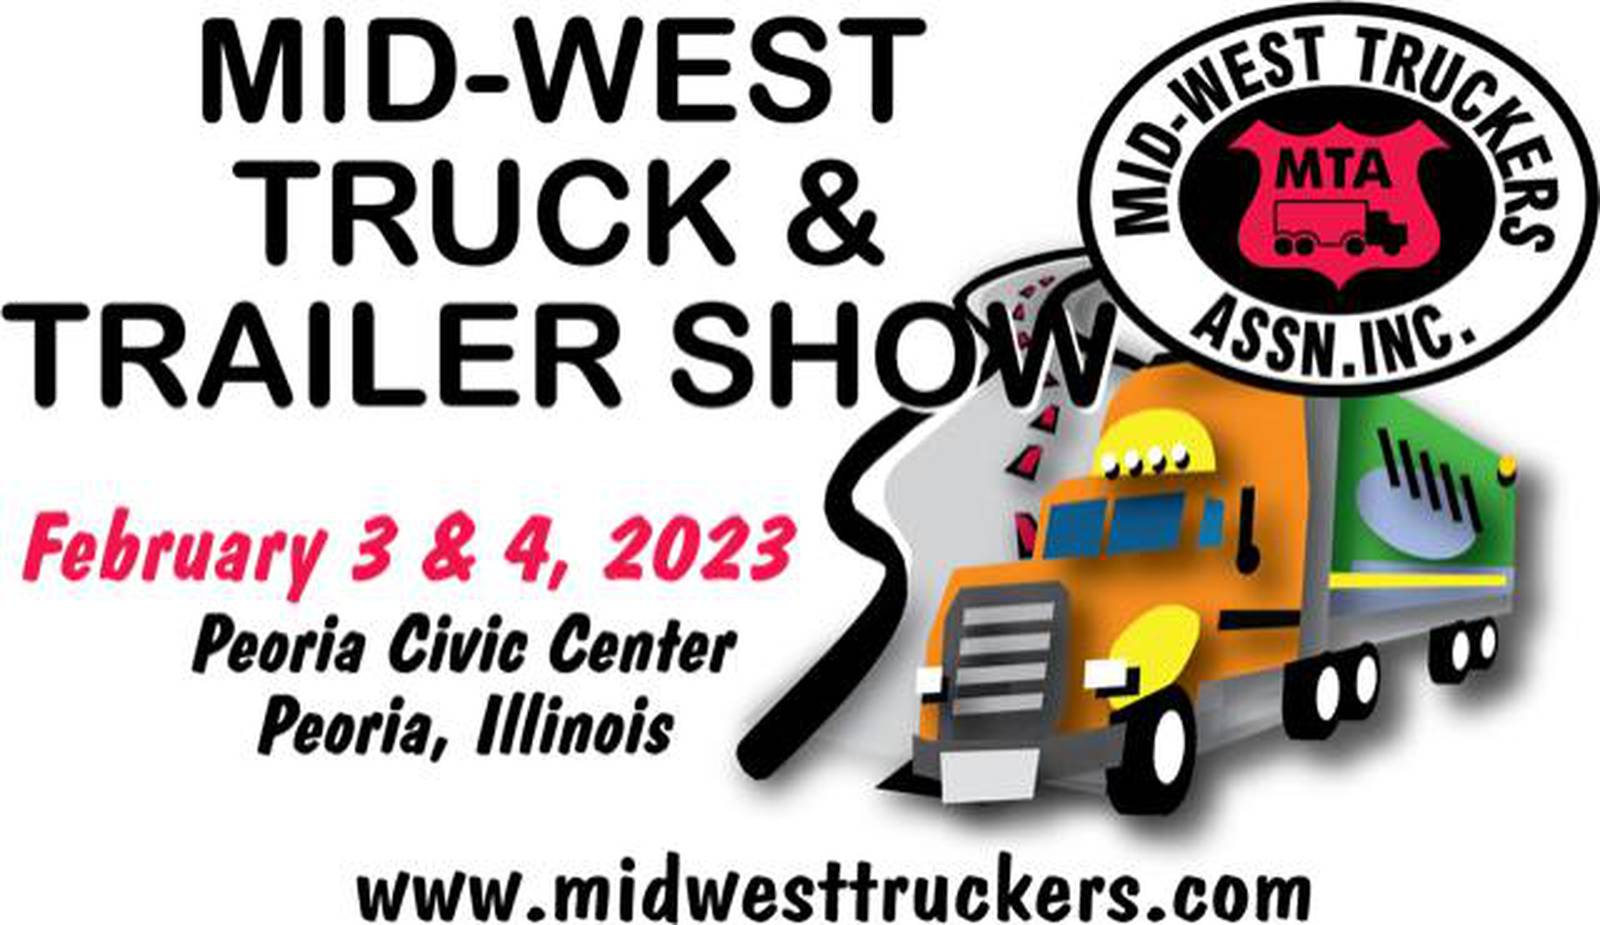 Truck show returns with new tech and old favorites AgriNews